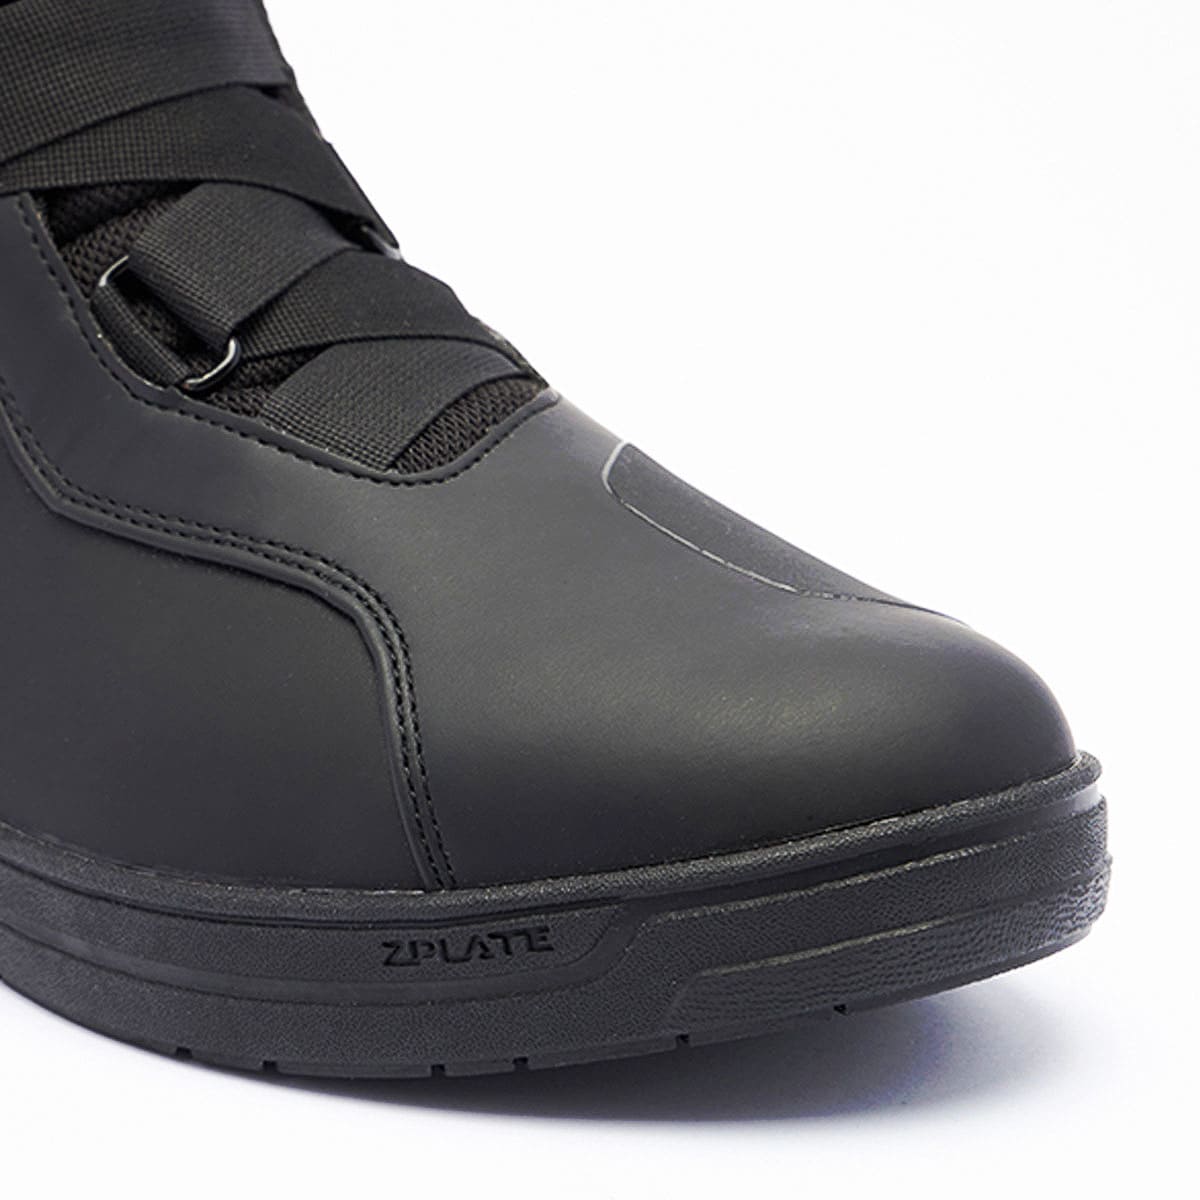 TCX Touring Boots with innovative lacing closure for perfect fit - toe